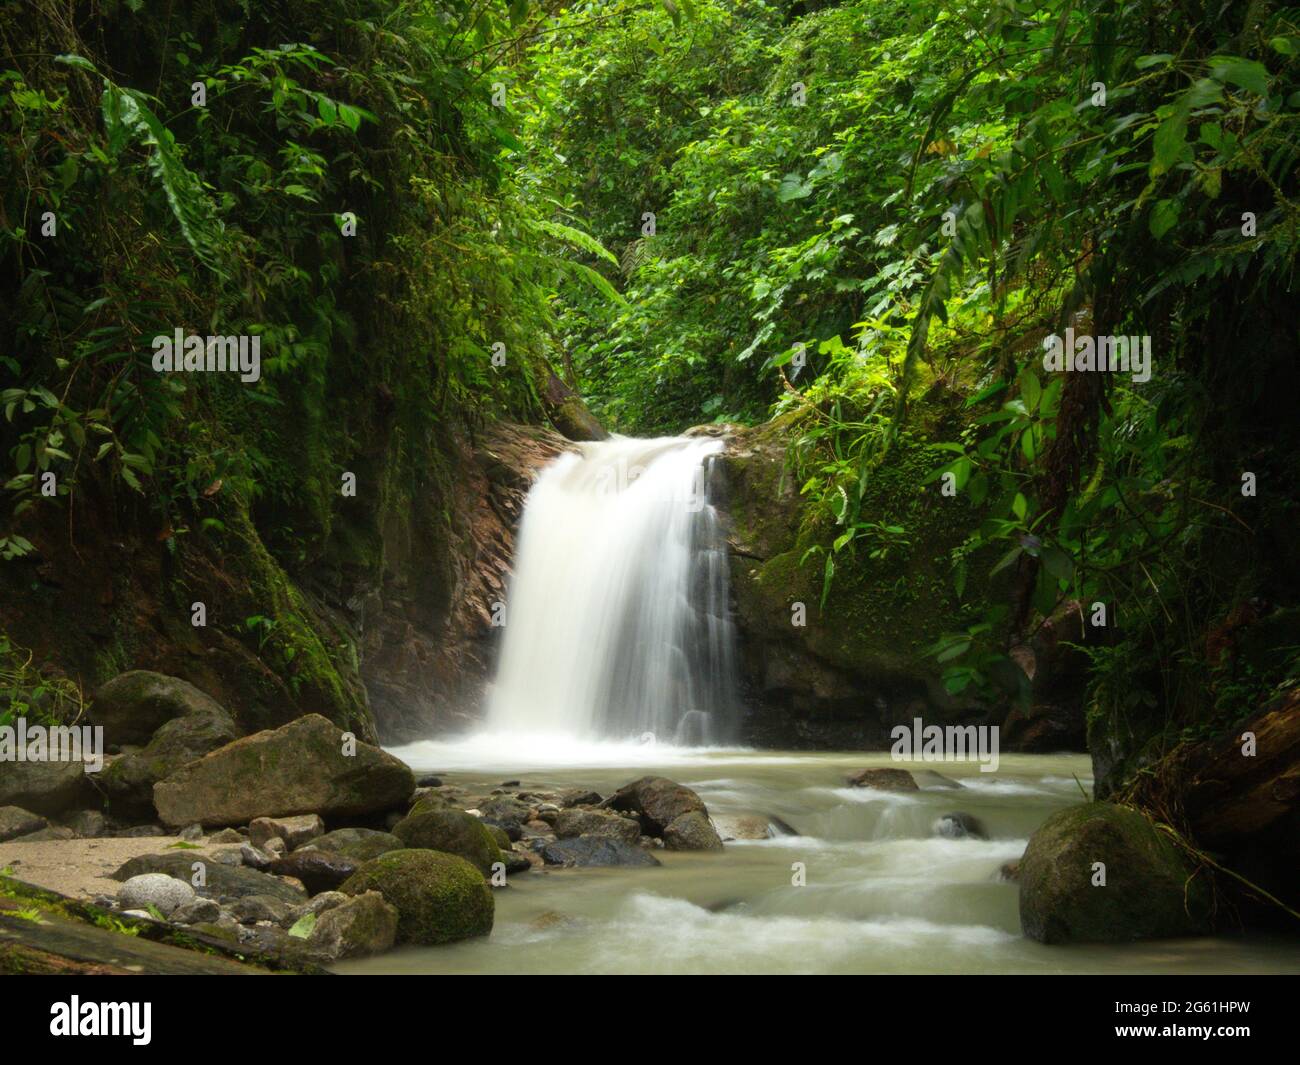 Slow motion of waterfall and river in forest Podocarpus National Park, Ecuador. Stock Photo